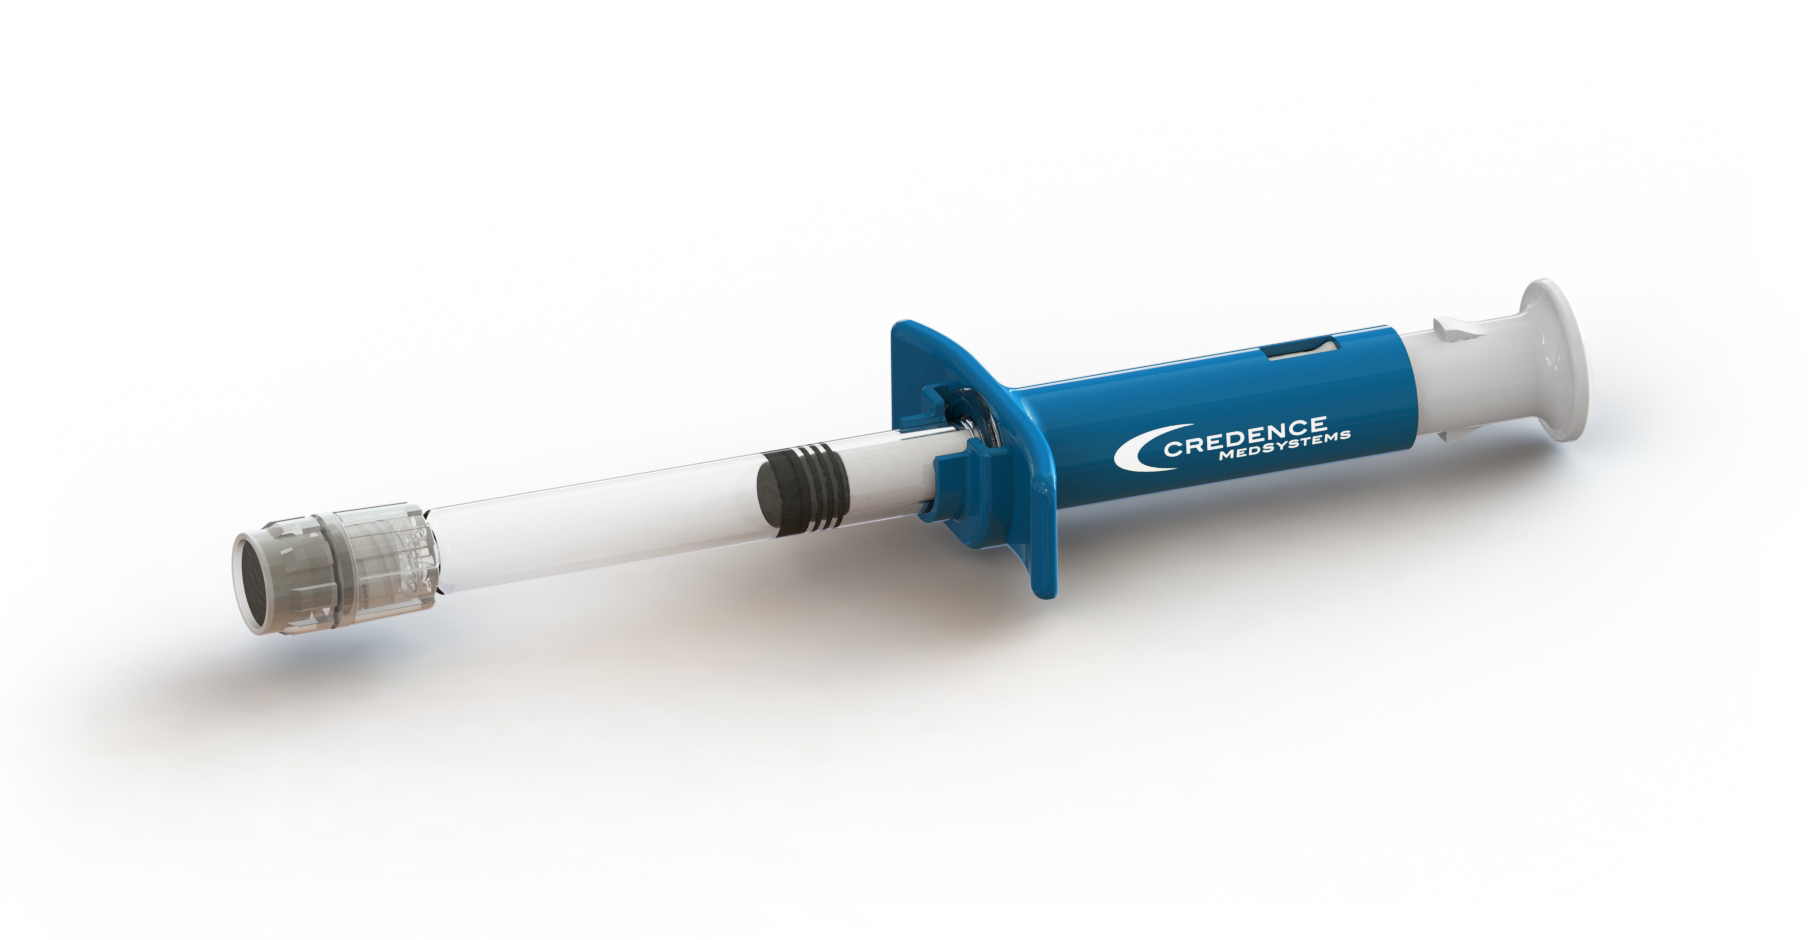 Figure 1: The Credence Multi-Site™ Injection System.